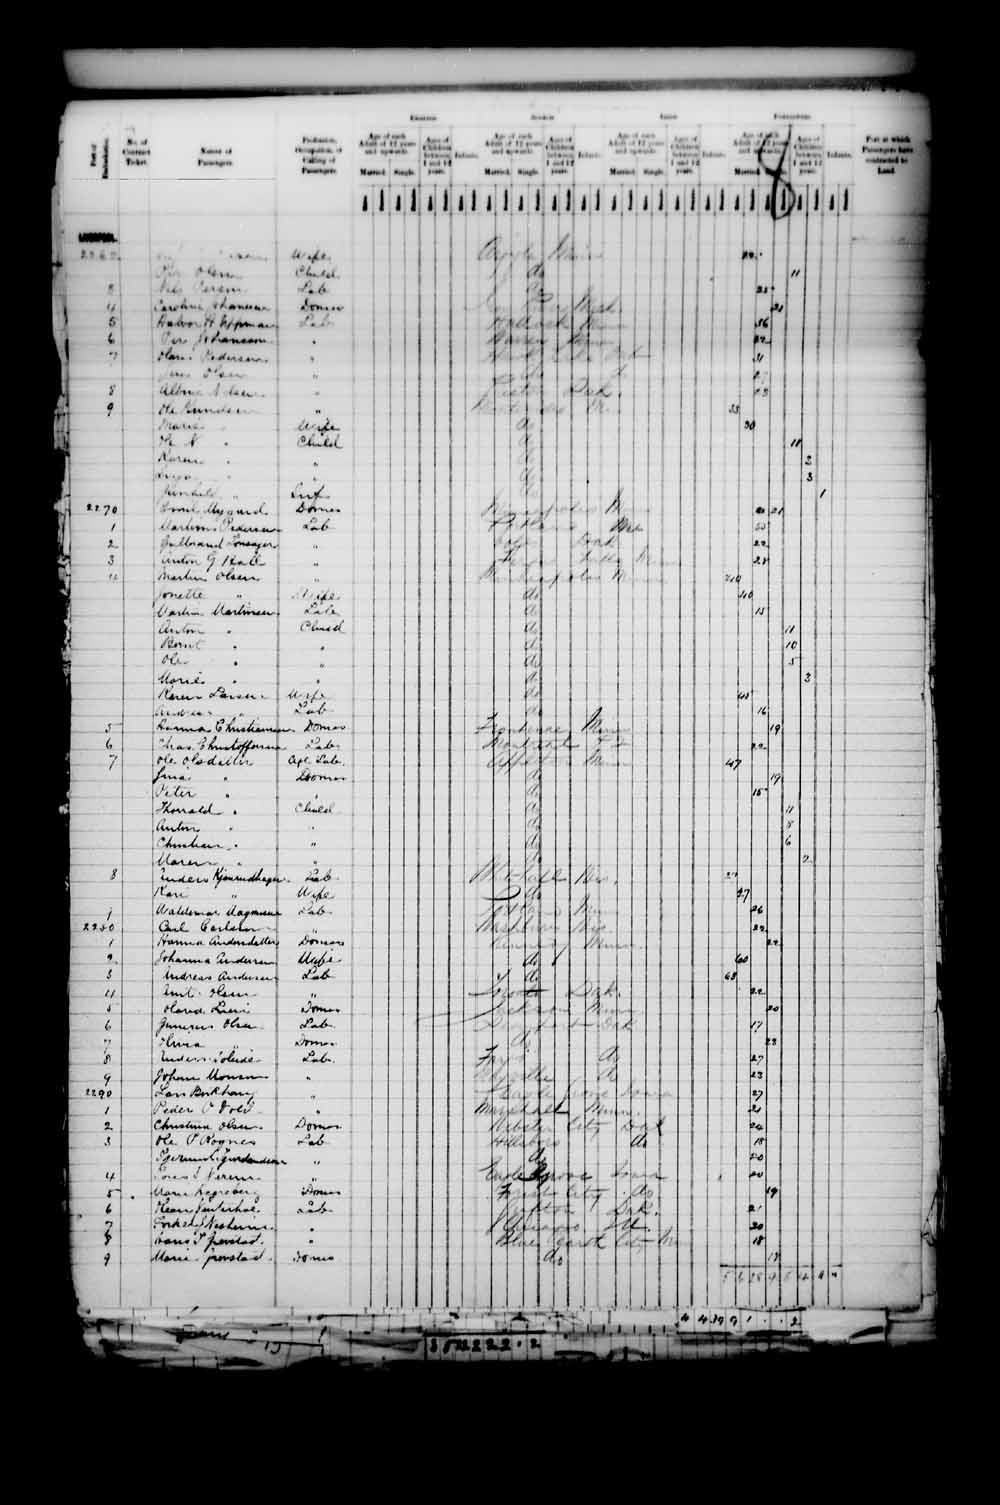 Digitized page of Quebec Passenger Lists for Image No.: e003546739